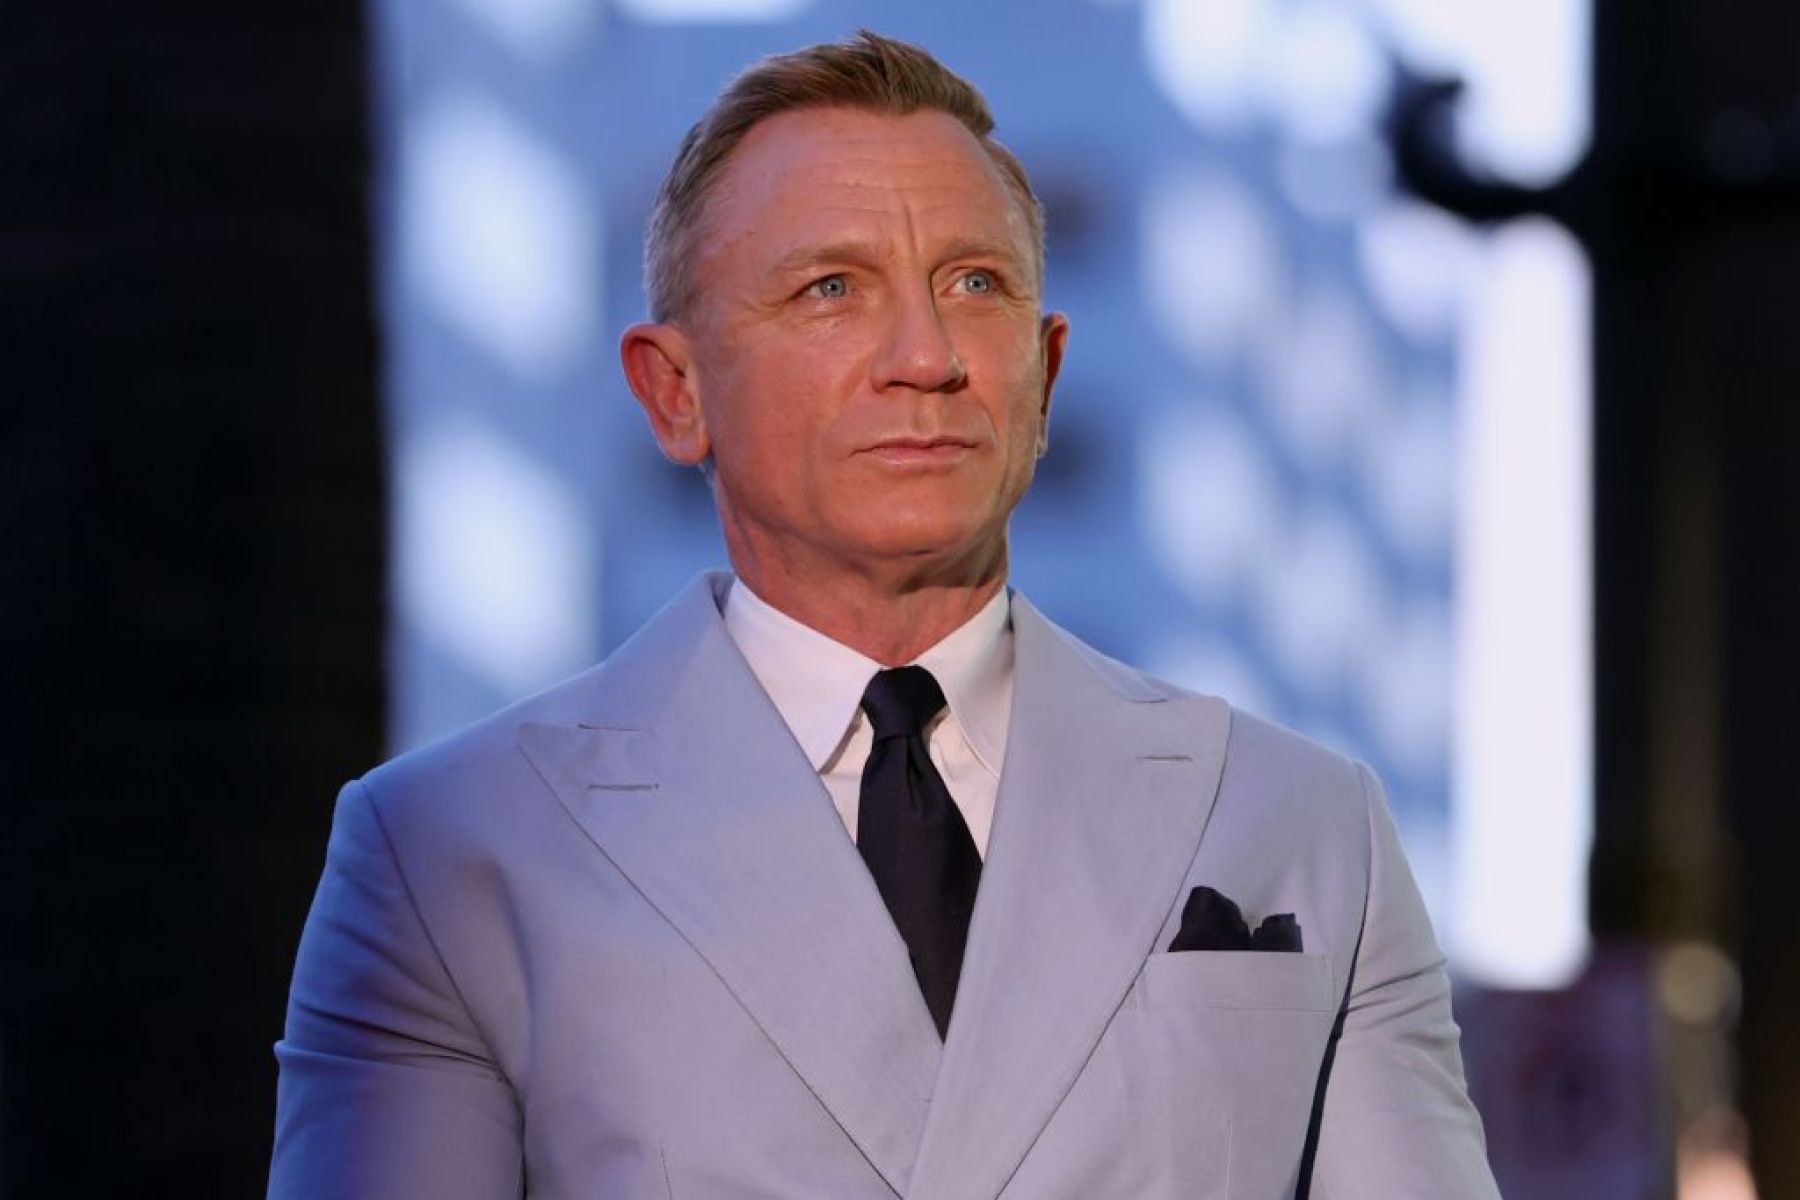 daniel Craig Awarded Same Title As James Bond For Queens 2022 Honours  Rolling Stone